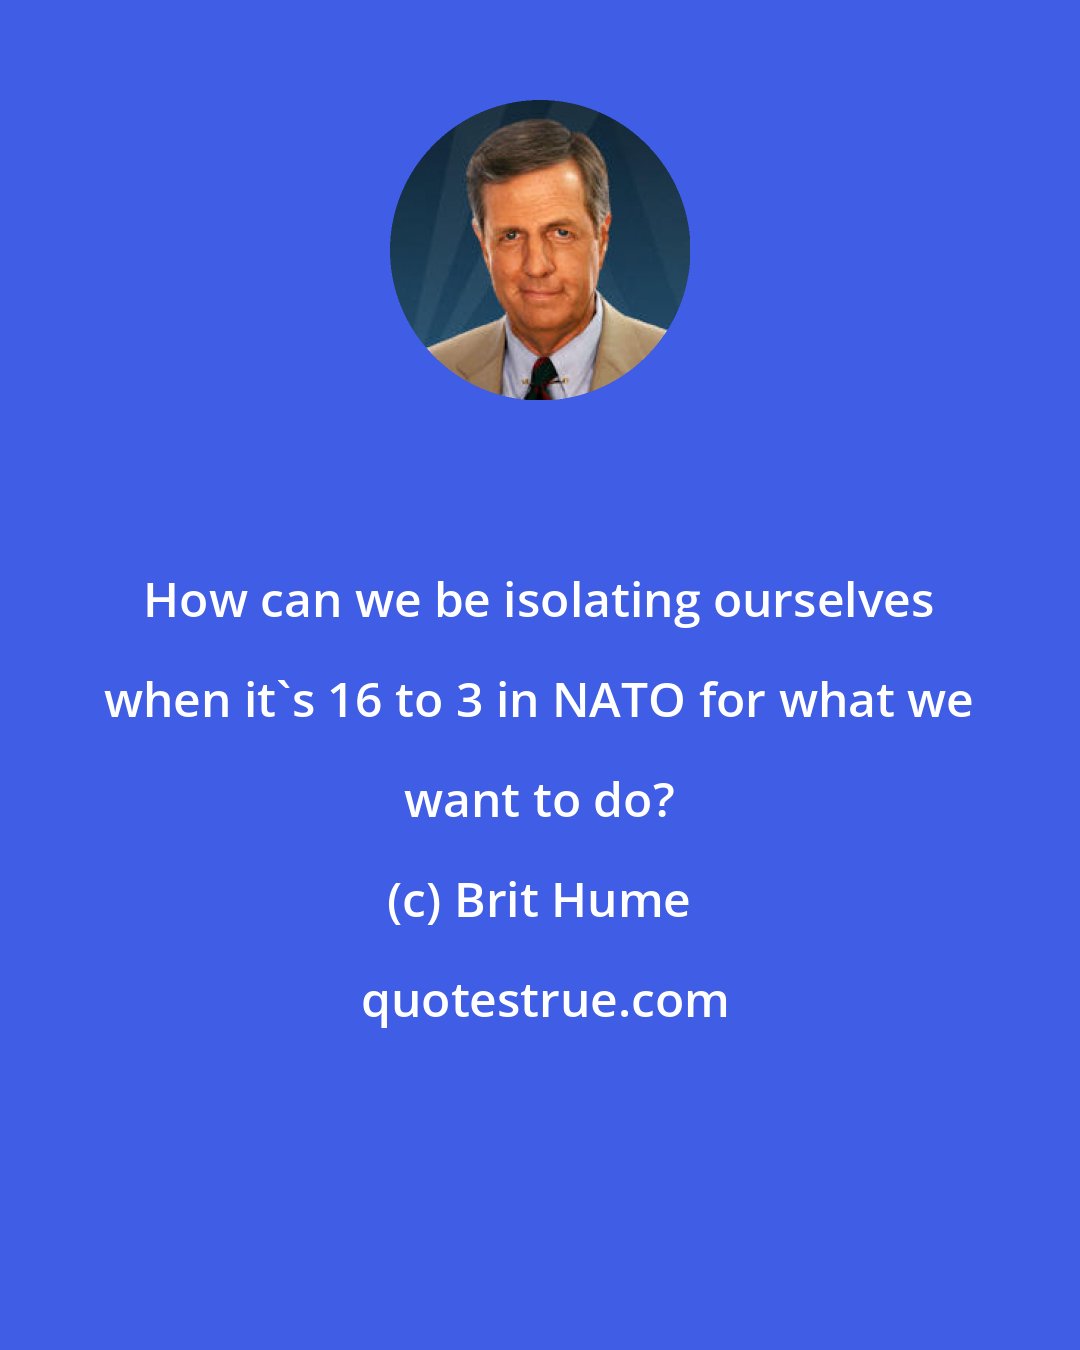 Brit Hume: How can we be isolating ourselves when it's 16 to 3 in NATO for what we want to do?